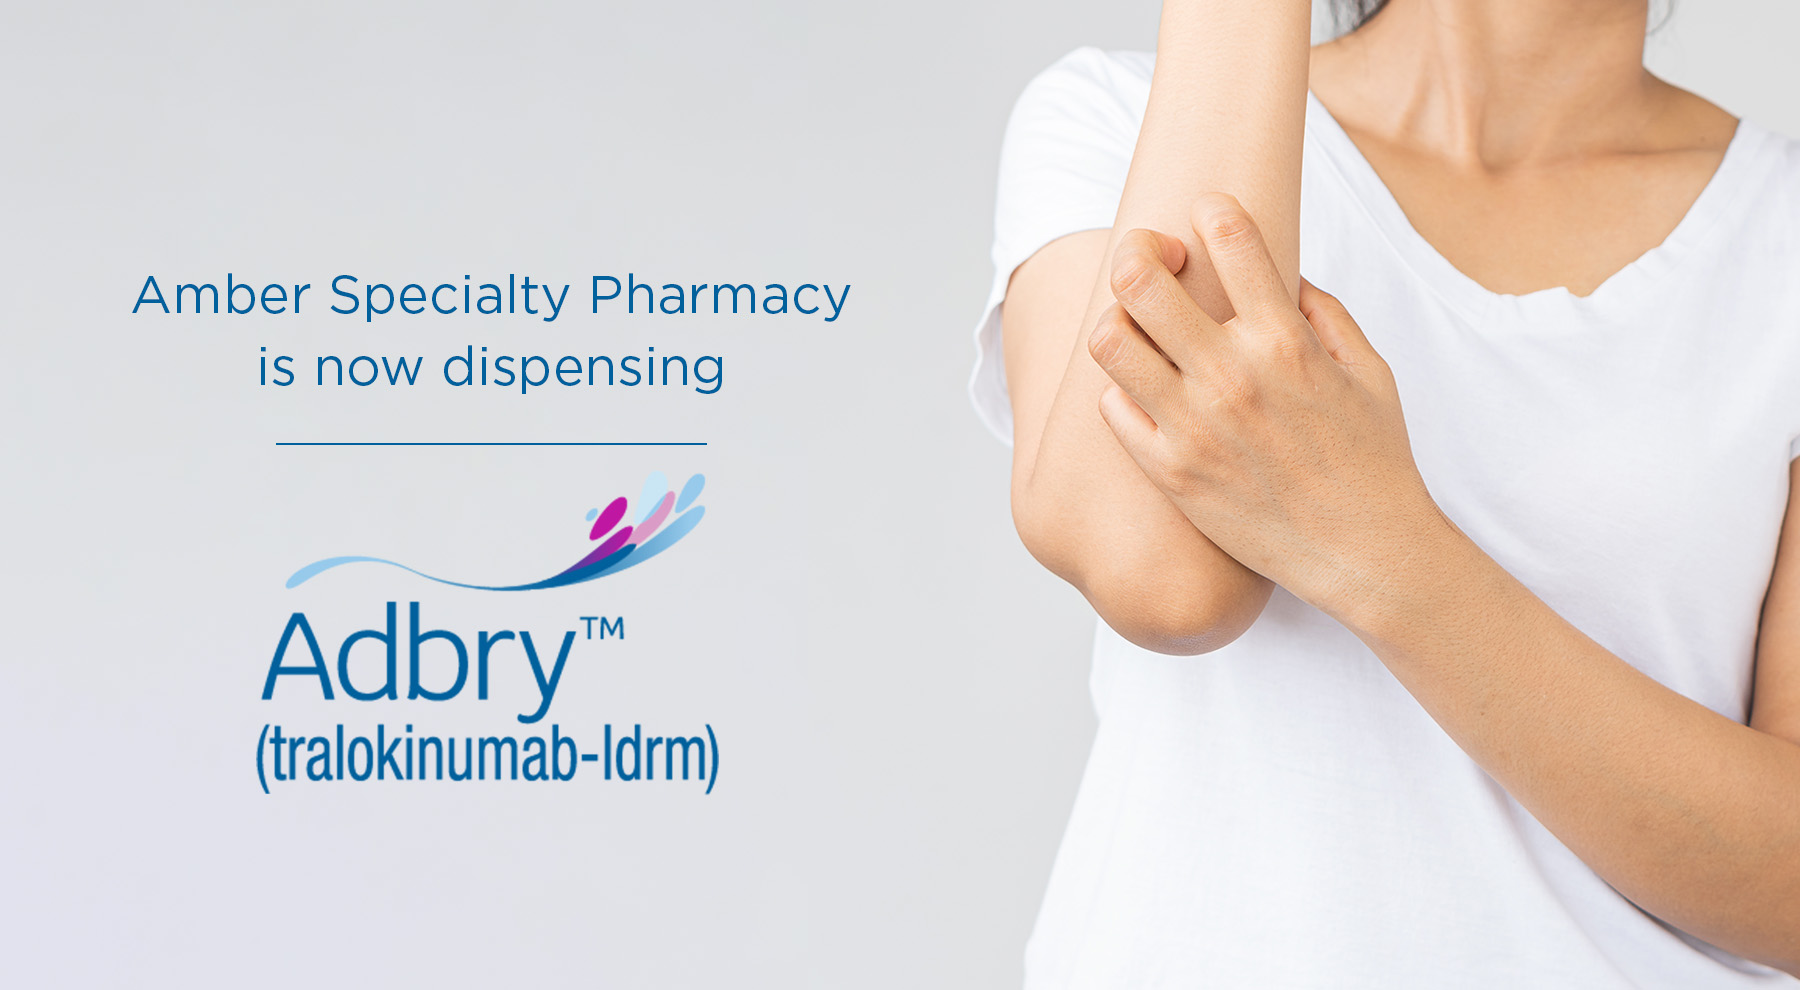 Amber Specialty Pharmacy is now dispensing Adbry for Atopic Dermatitis